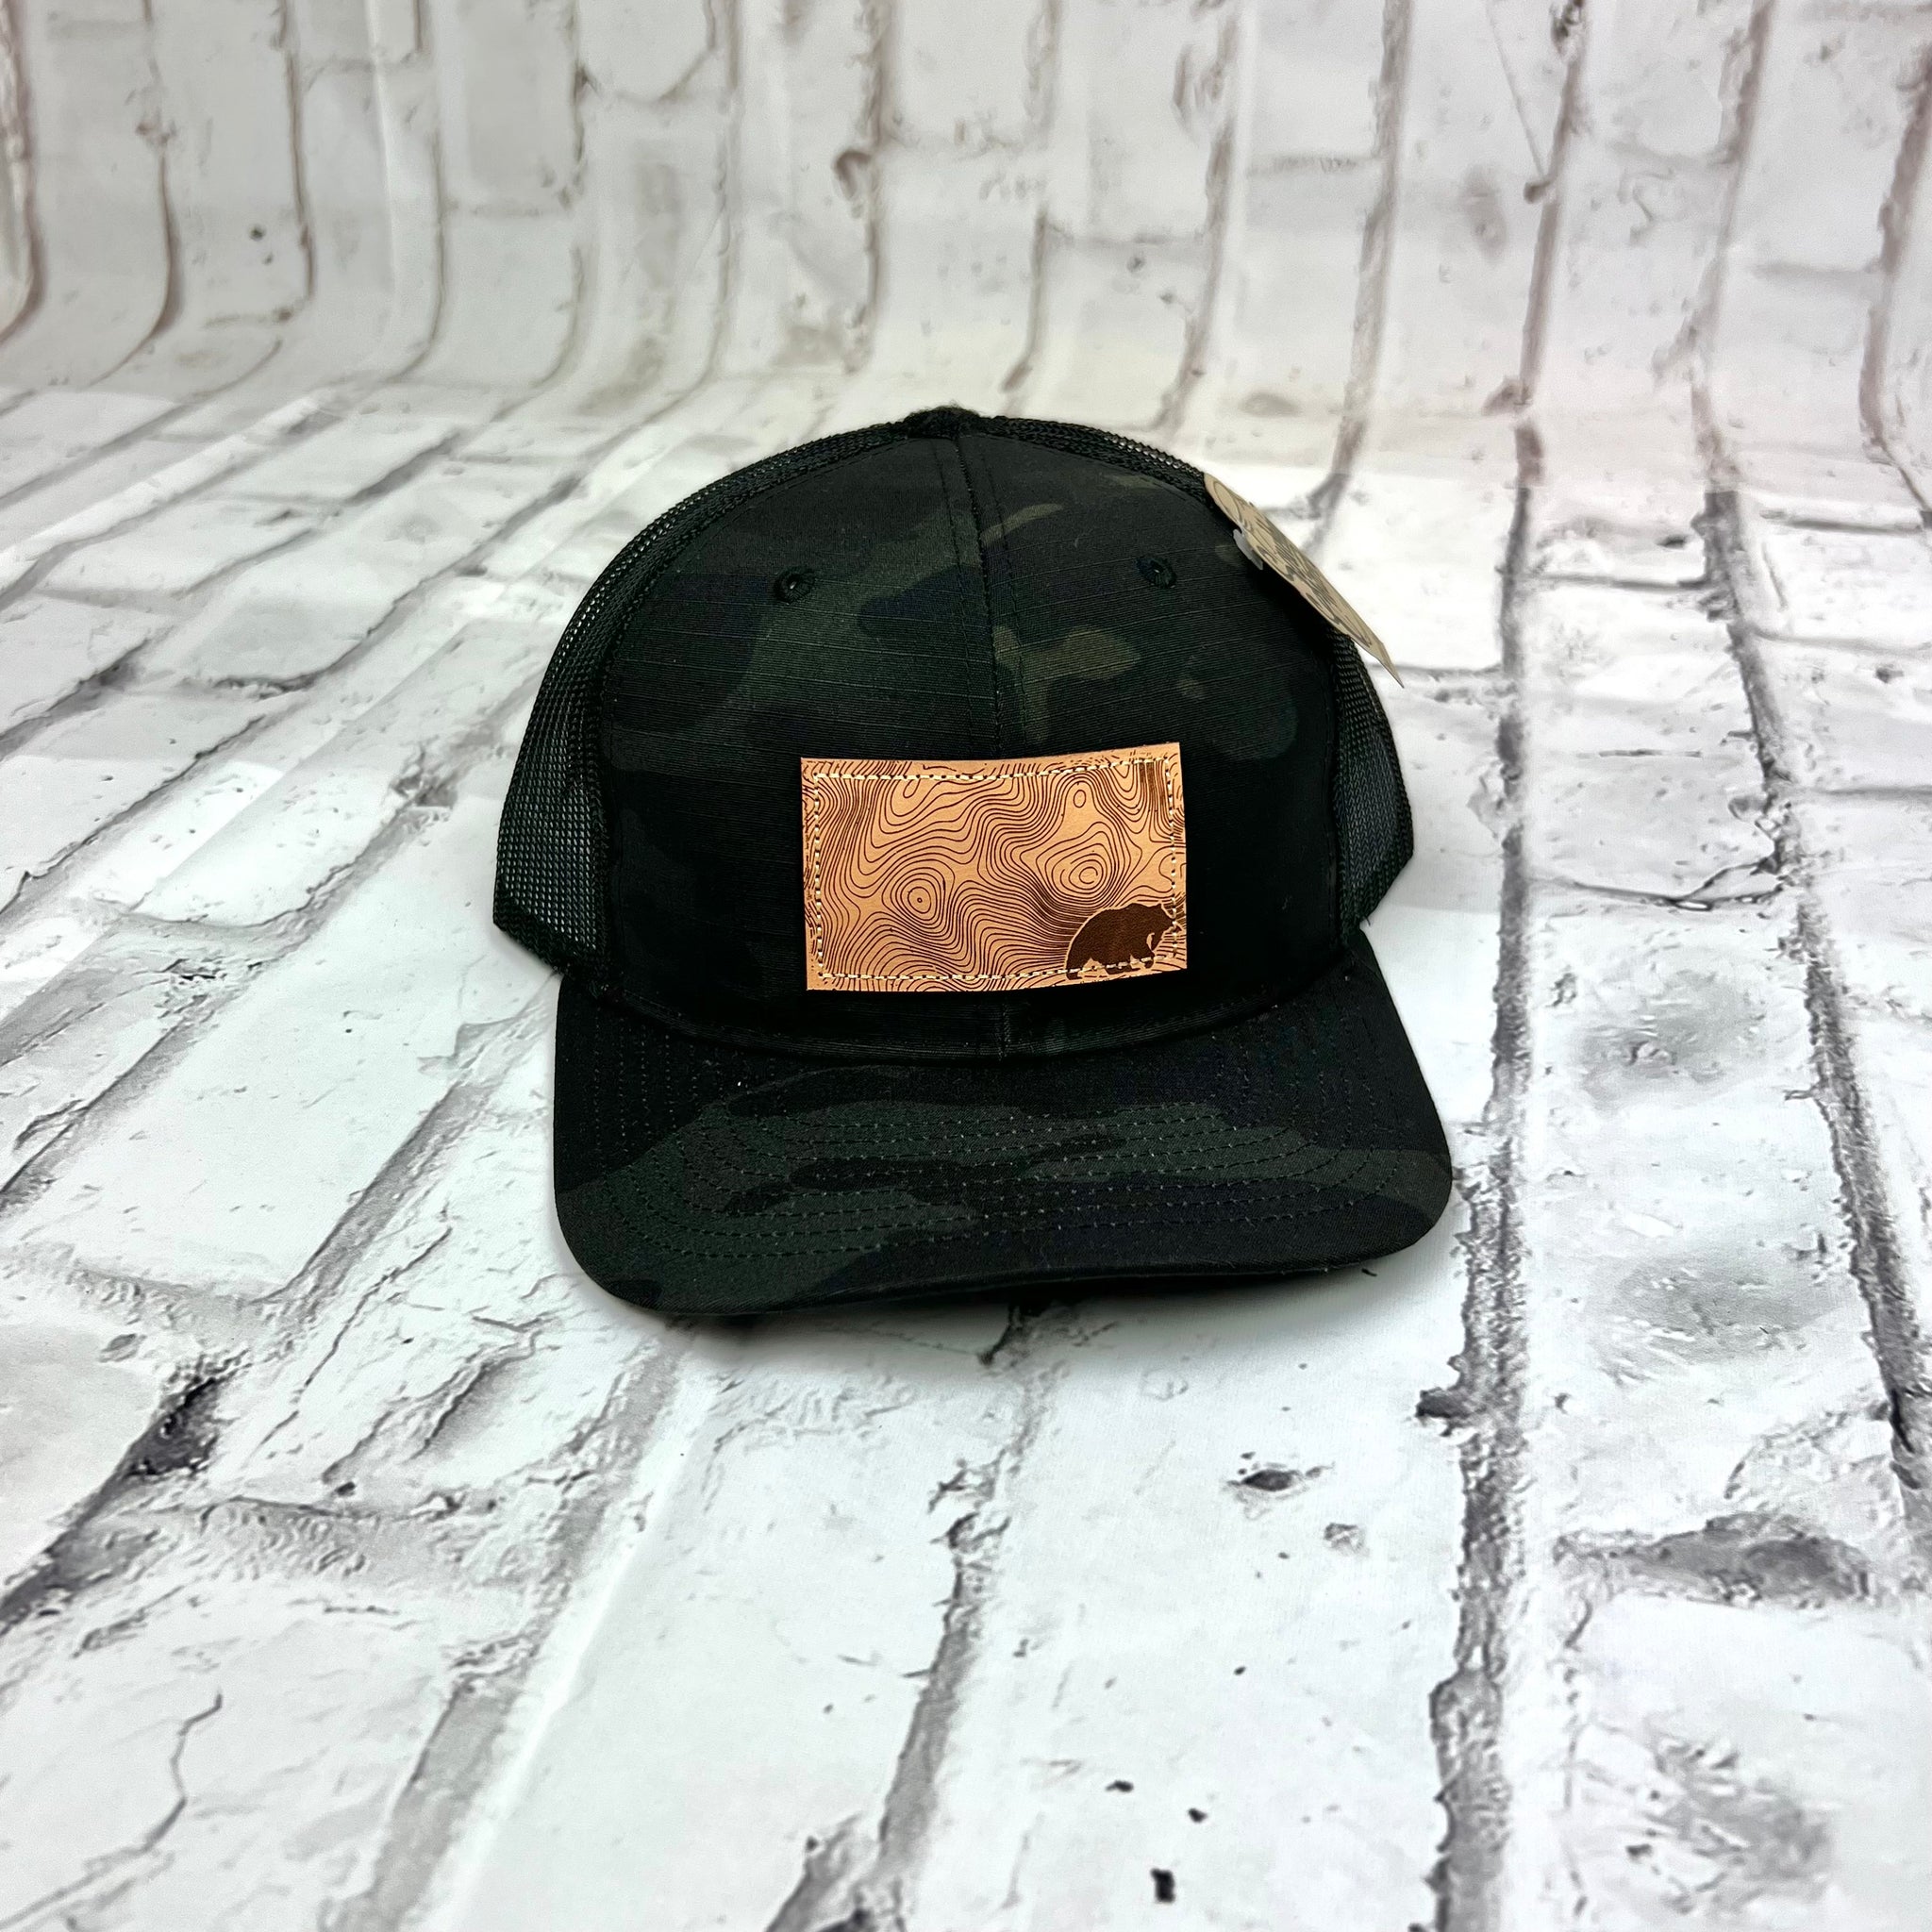 Ripple And Run "Bear Topography" Hat - Multi Camo And Black with Leather Patch